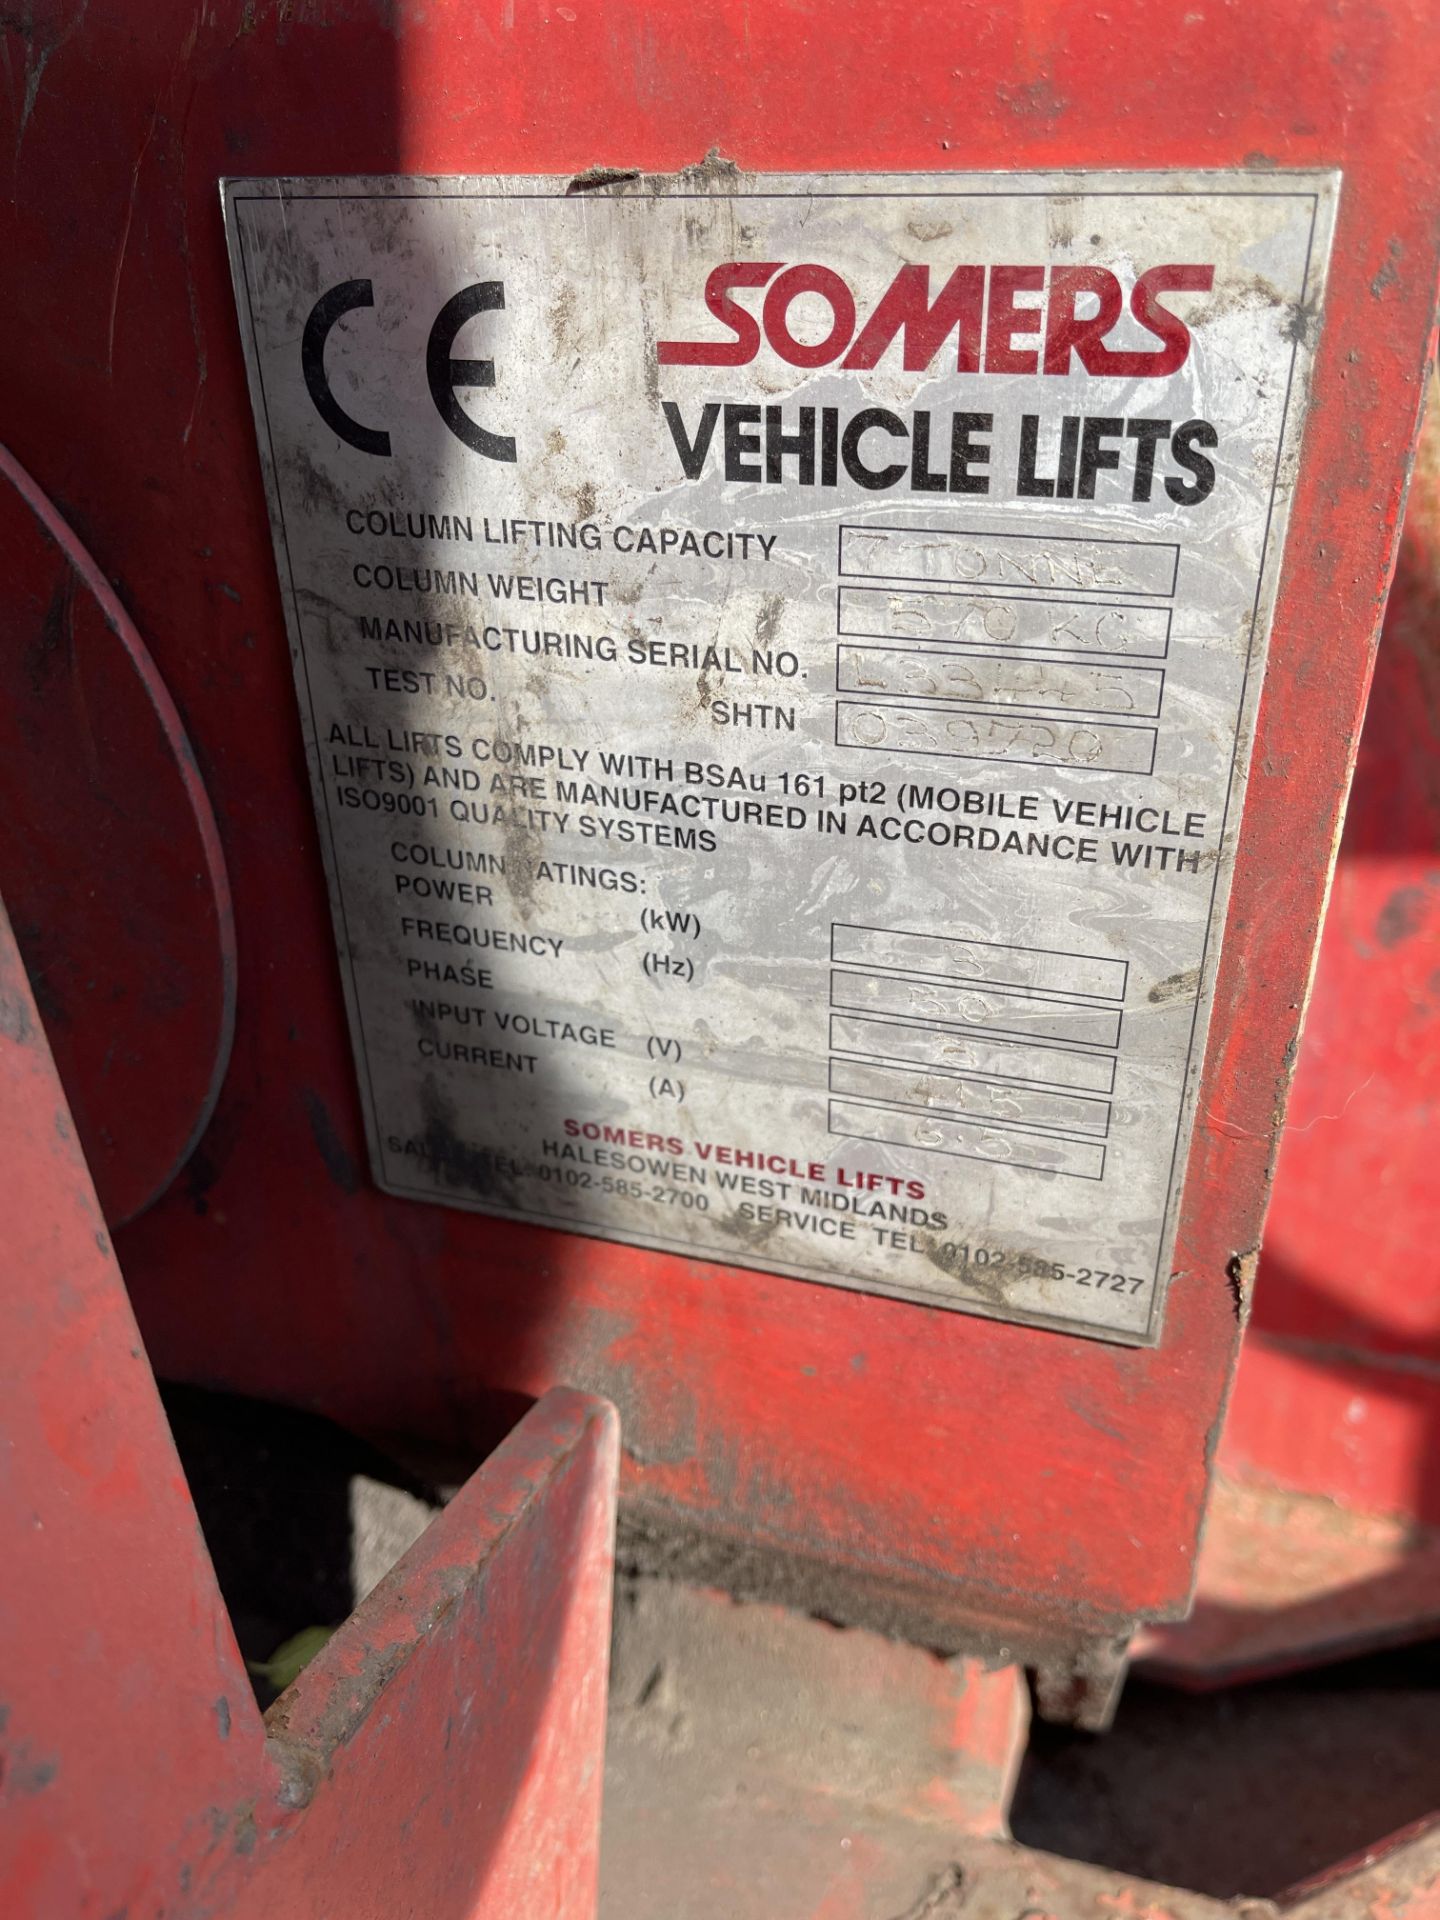 4: Somers 7 Tonne Mobile Vehicle Lifts - Image 10 of 24